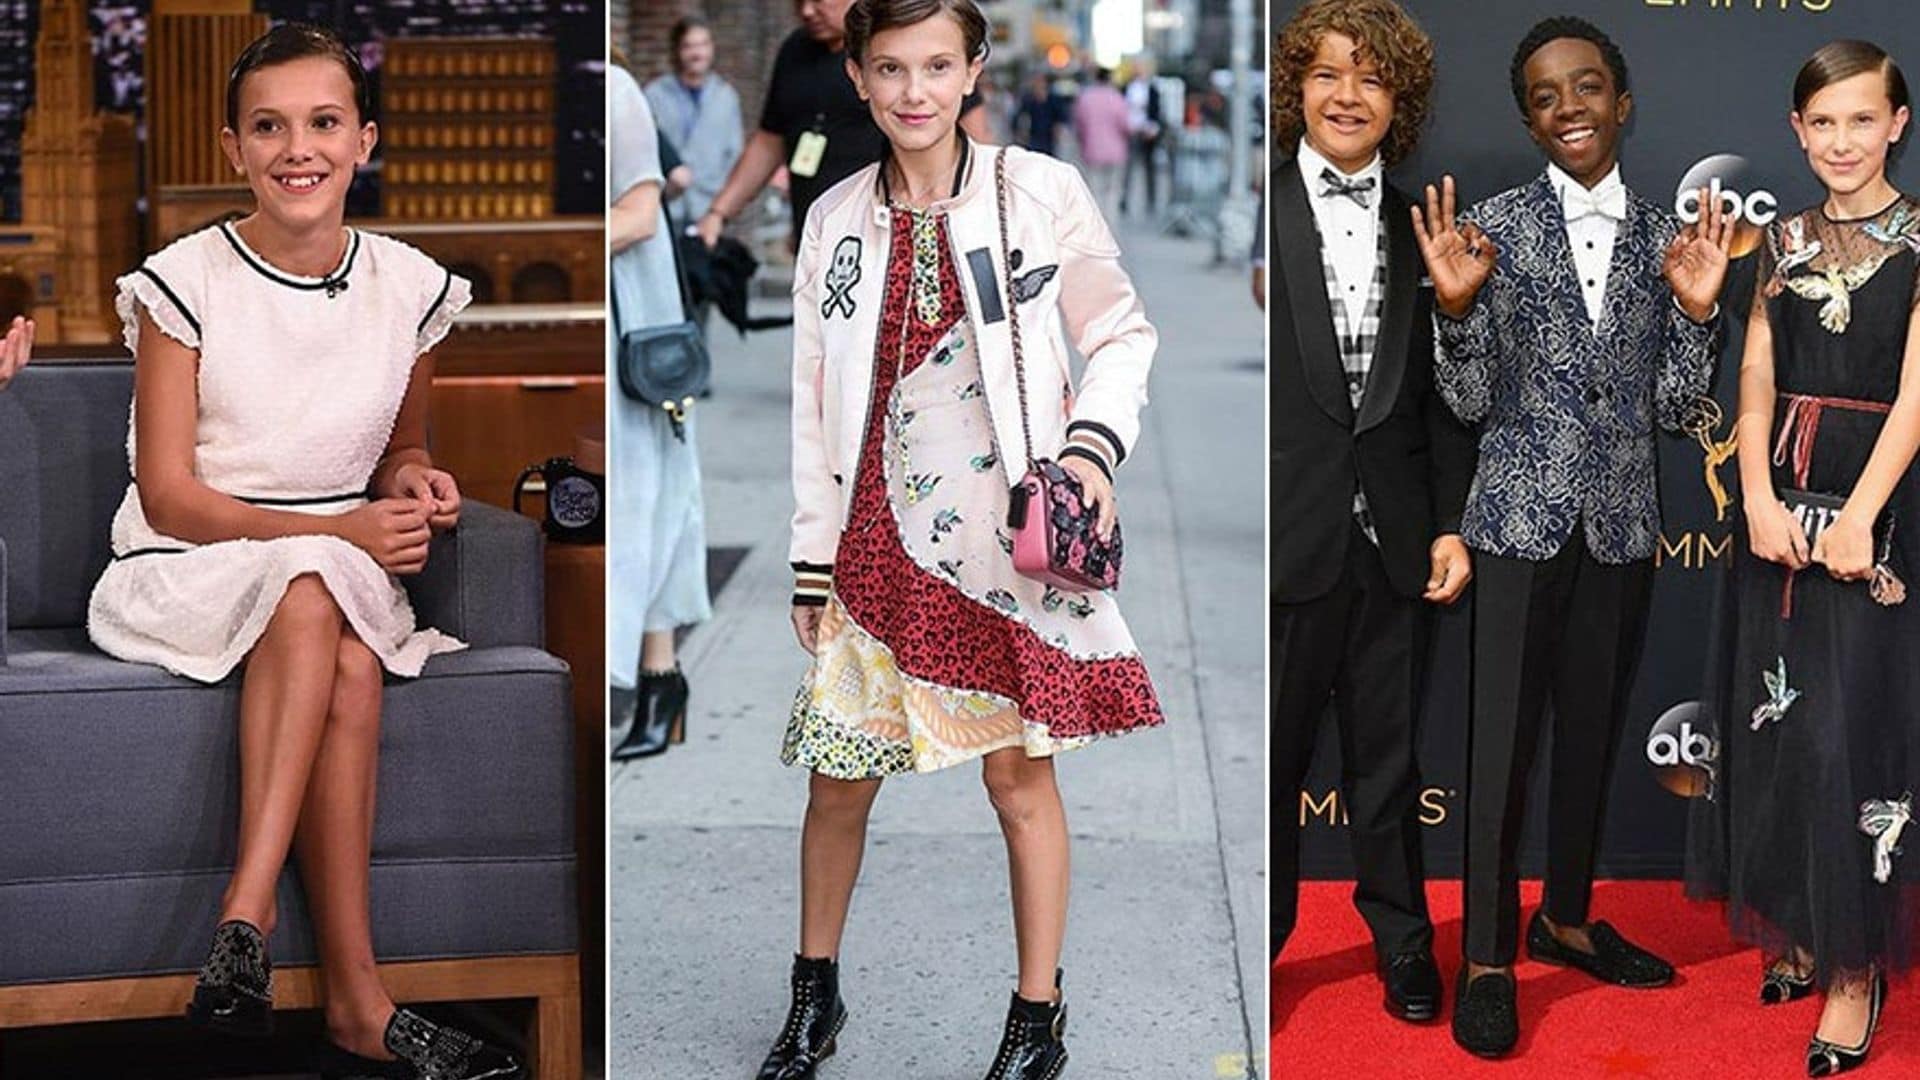 'Stranger Things' star Millie Bobby Brown's adorable style